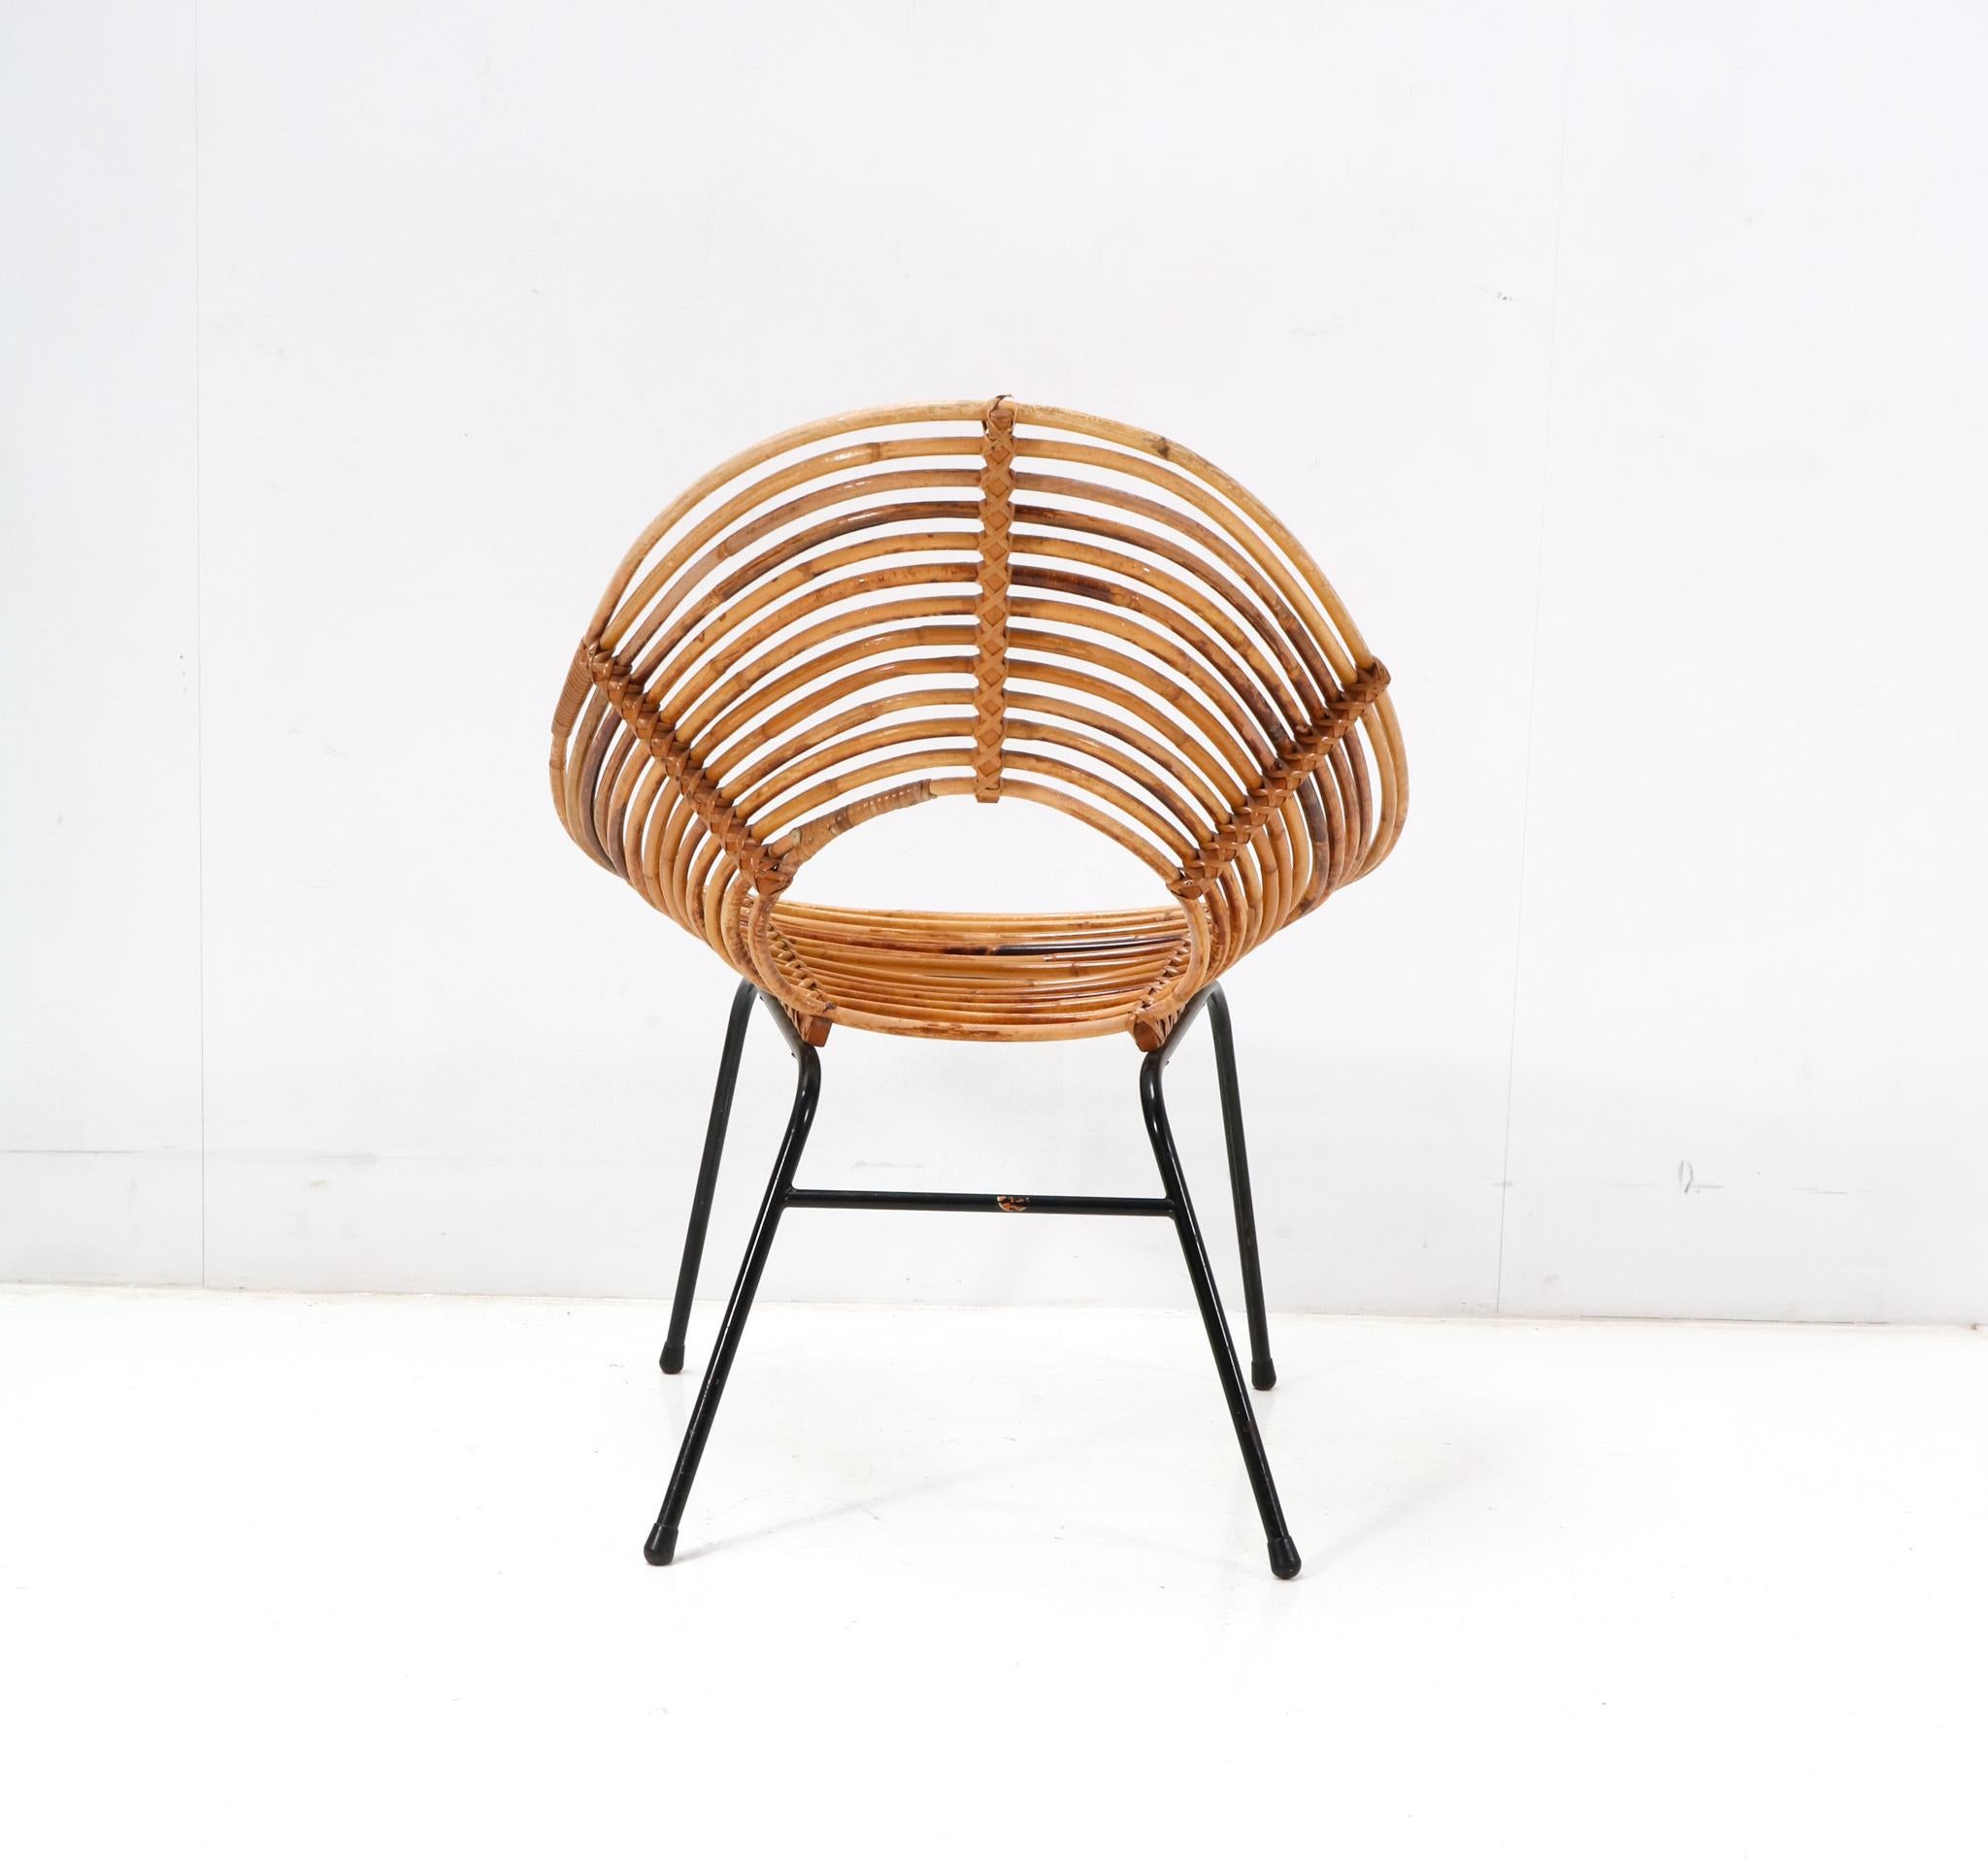 Rattan Mid-Century Modern Lounge Chair by Dirk van Sliedregt for Rohe, 1950s For Sale 1